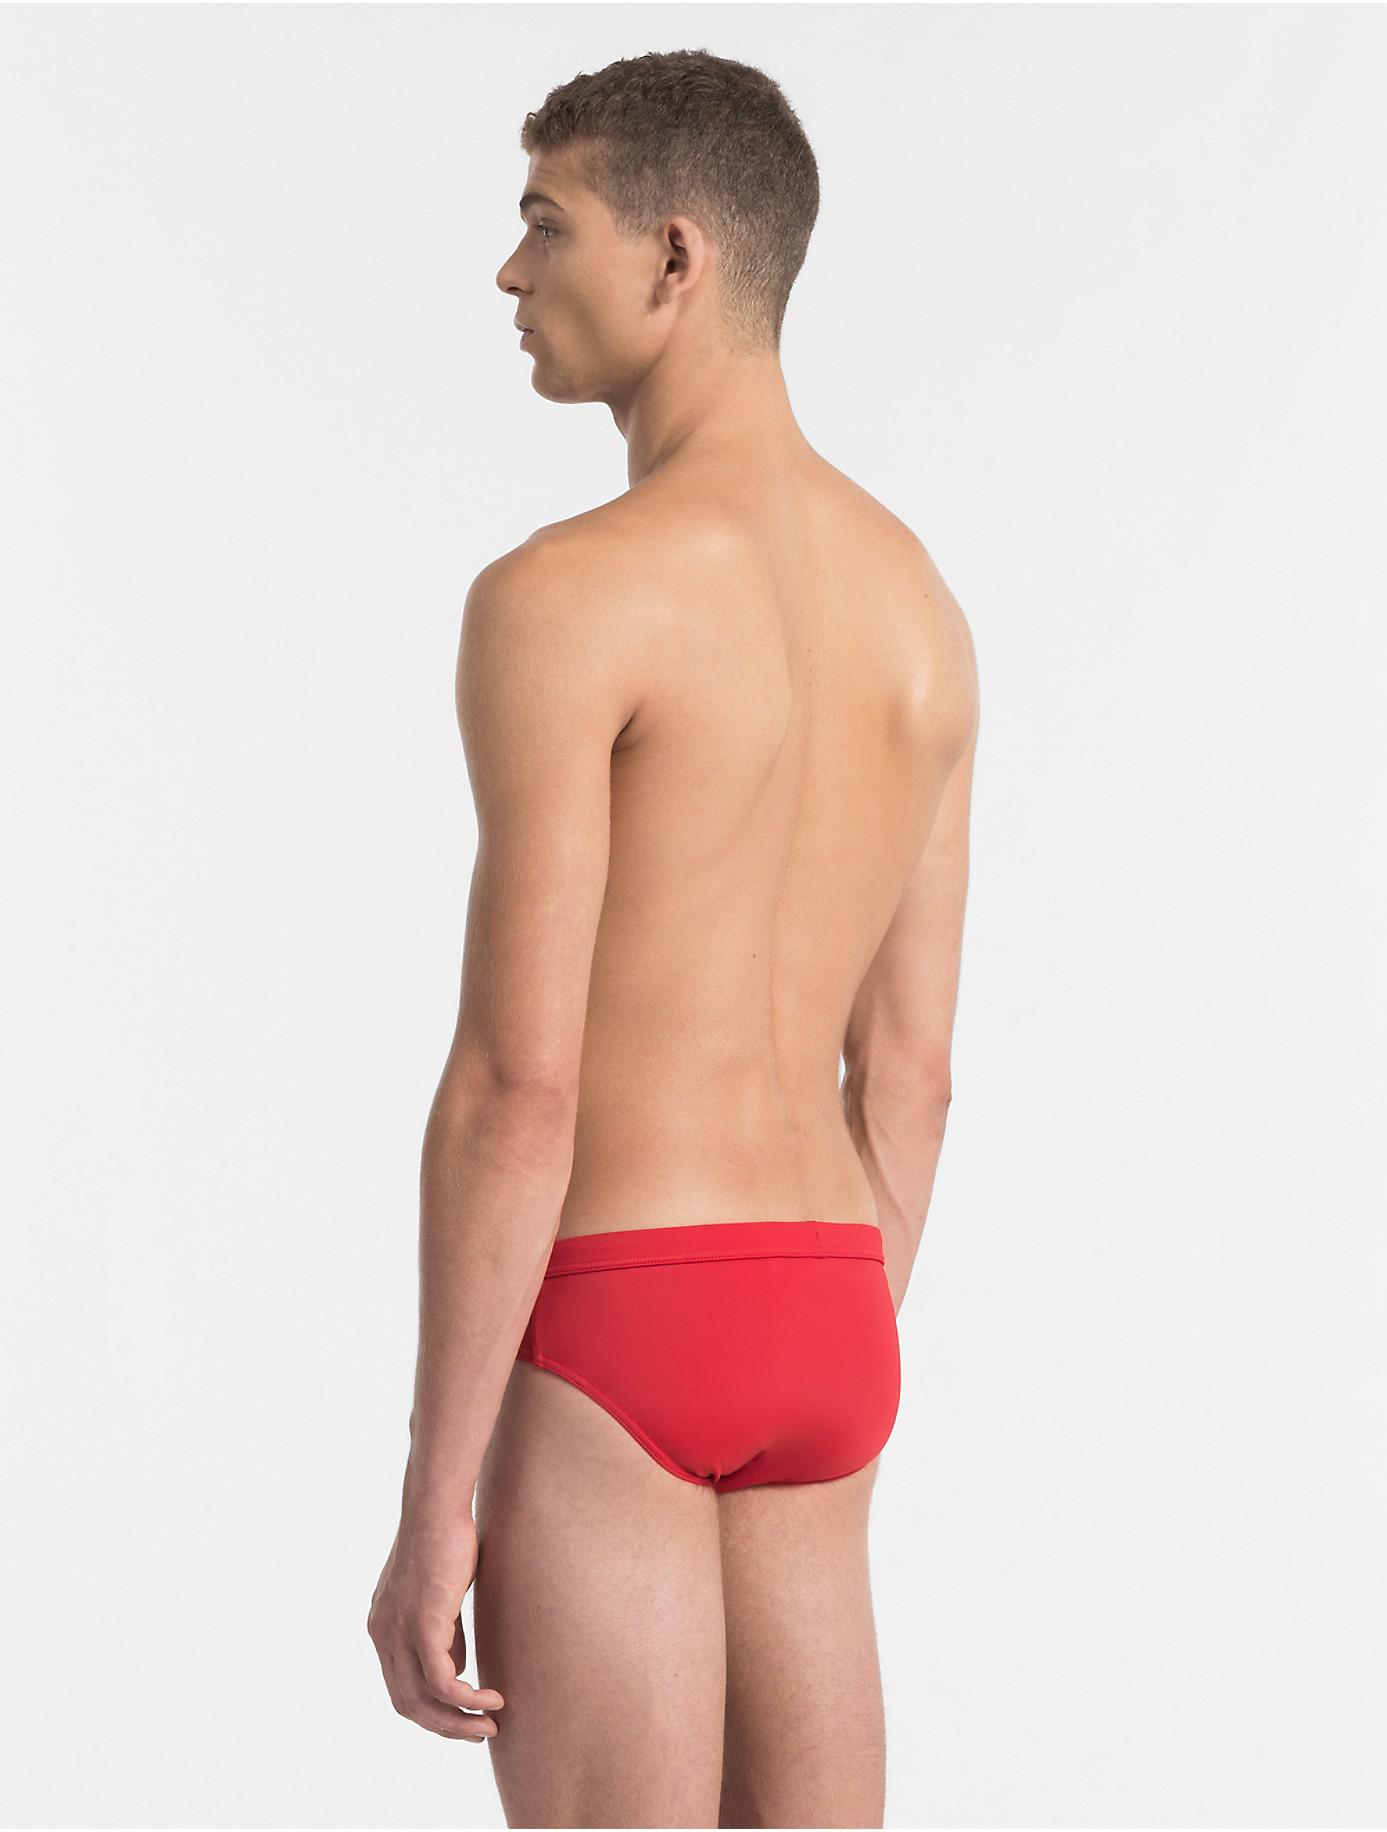 Calvin Klein Synthetic Core Solid Logo Swim Briefs in Red for Men - Lyst